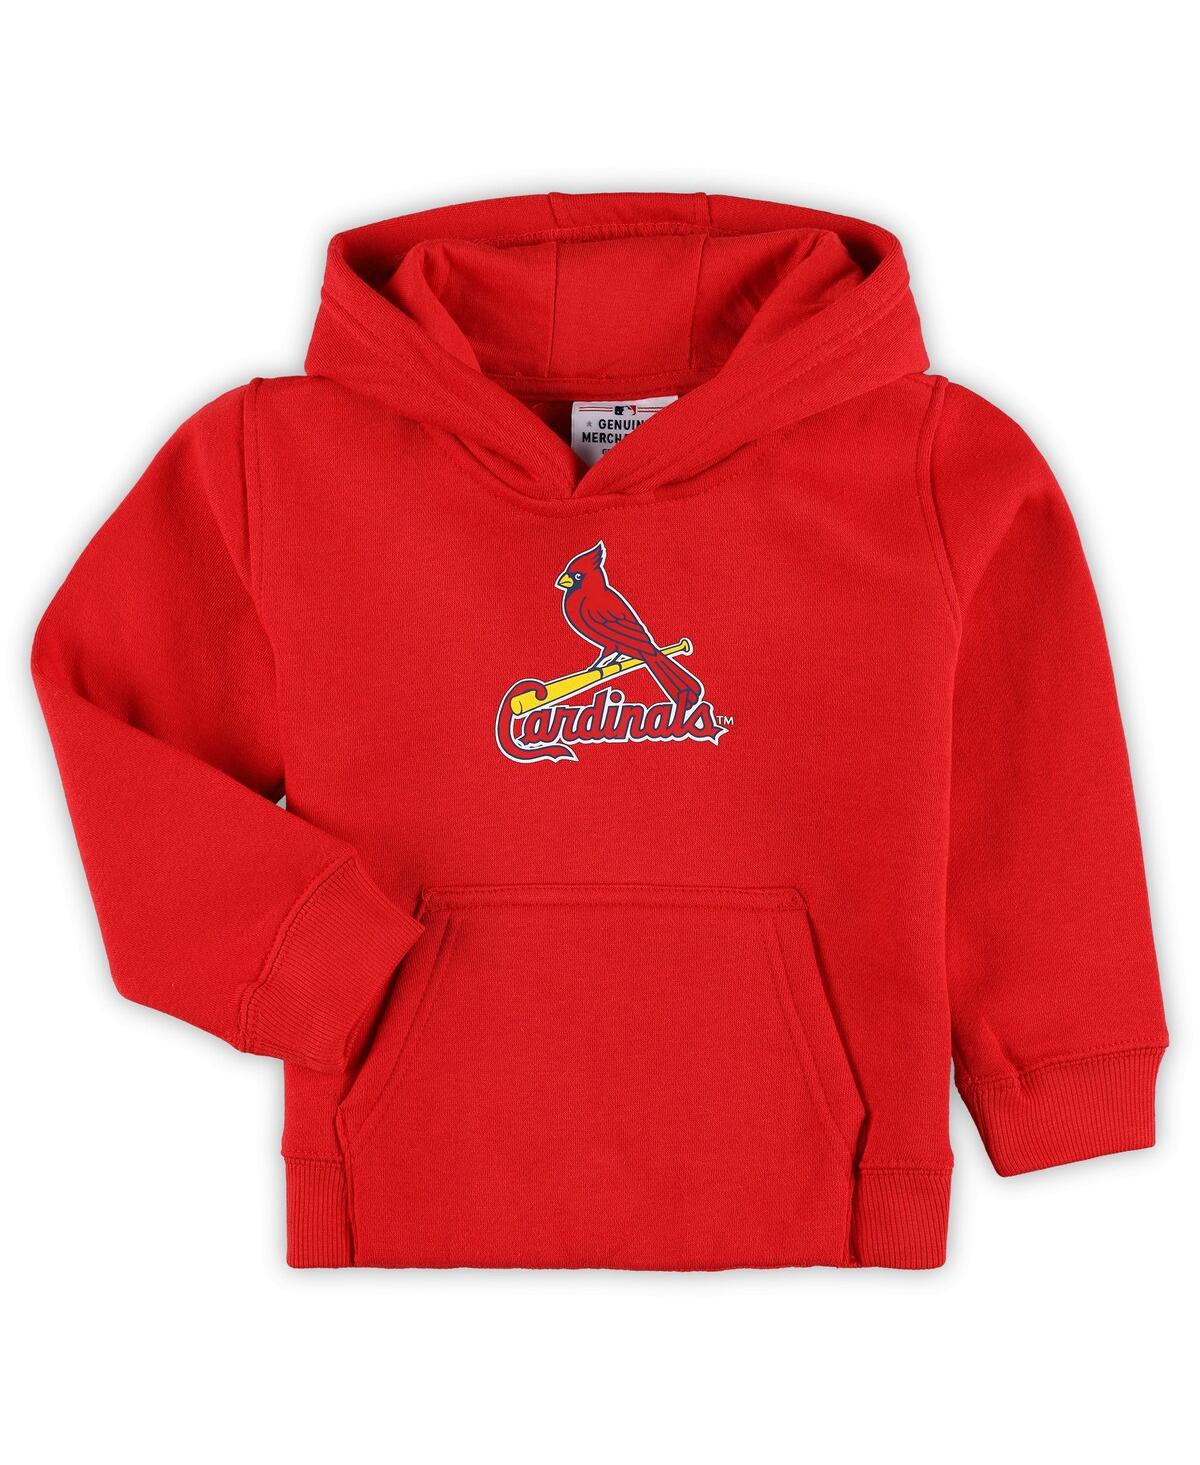 Outerstuff Babies' Toddler Boys And Girls Red St. Louis Cardinals Team Primary Logo Fleece Pullover Hoodie